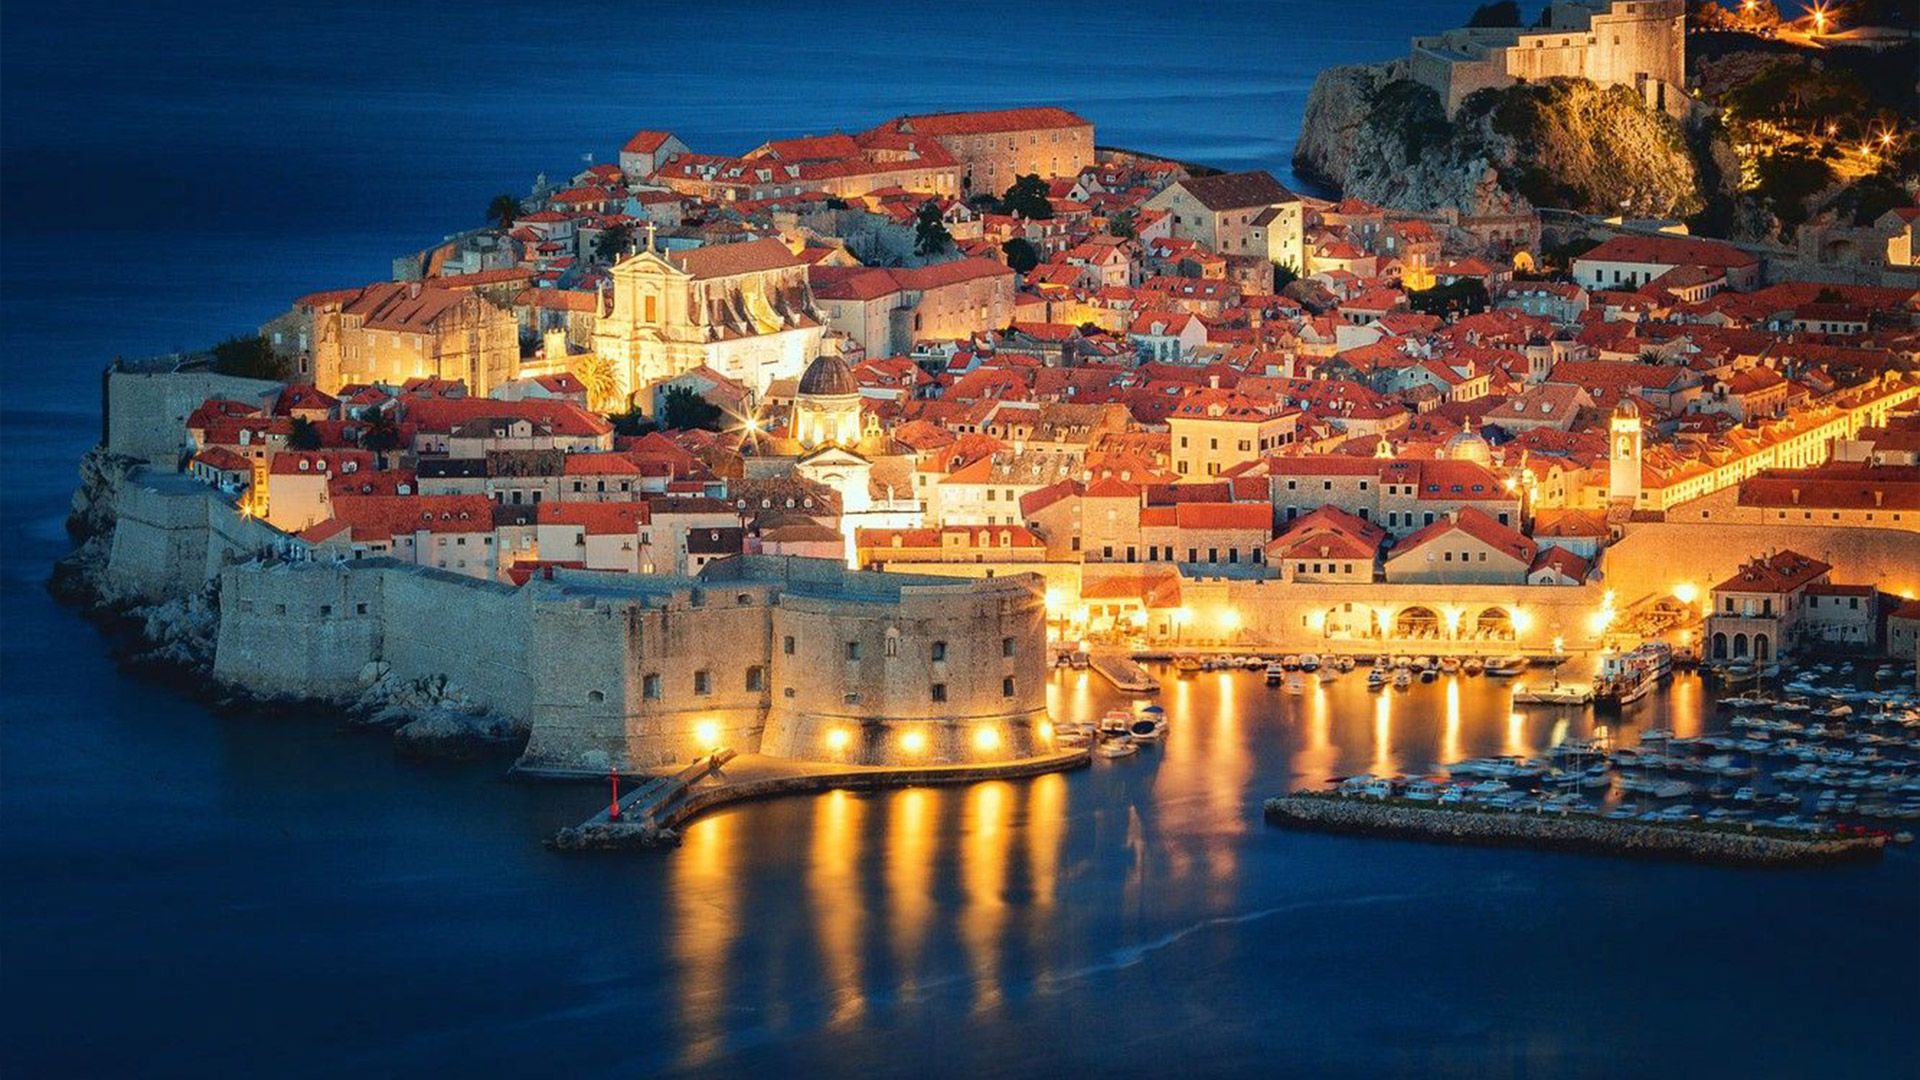 With PayPorter, you can make fast, easy and safe money transfers to Croatia at the most affordable prices!